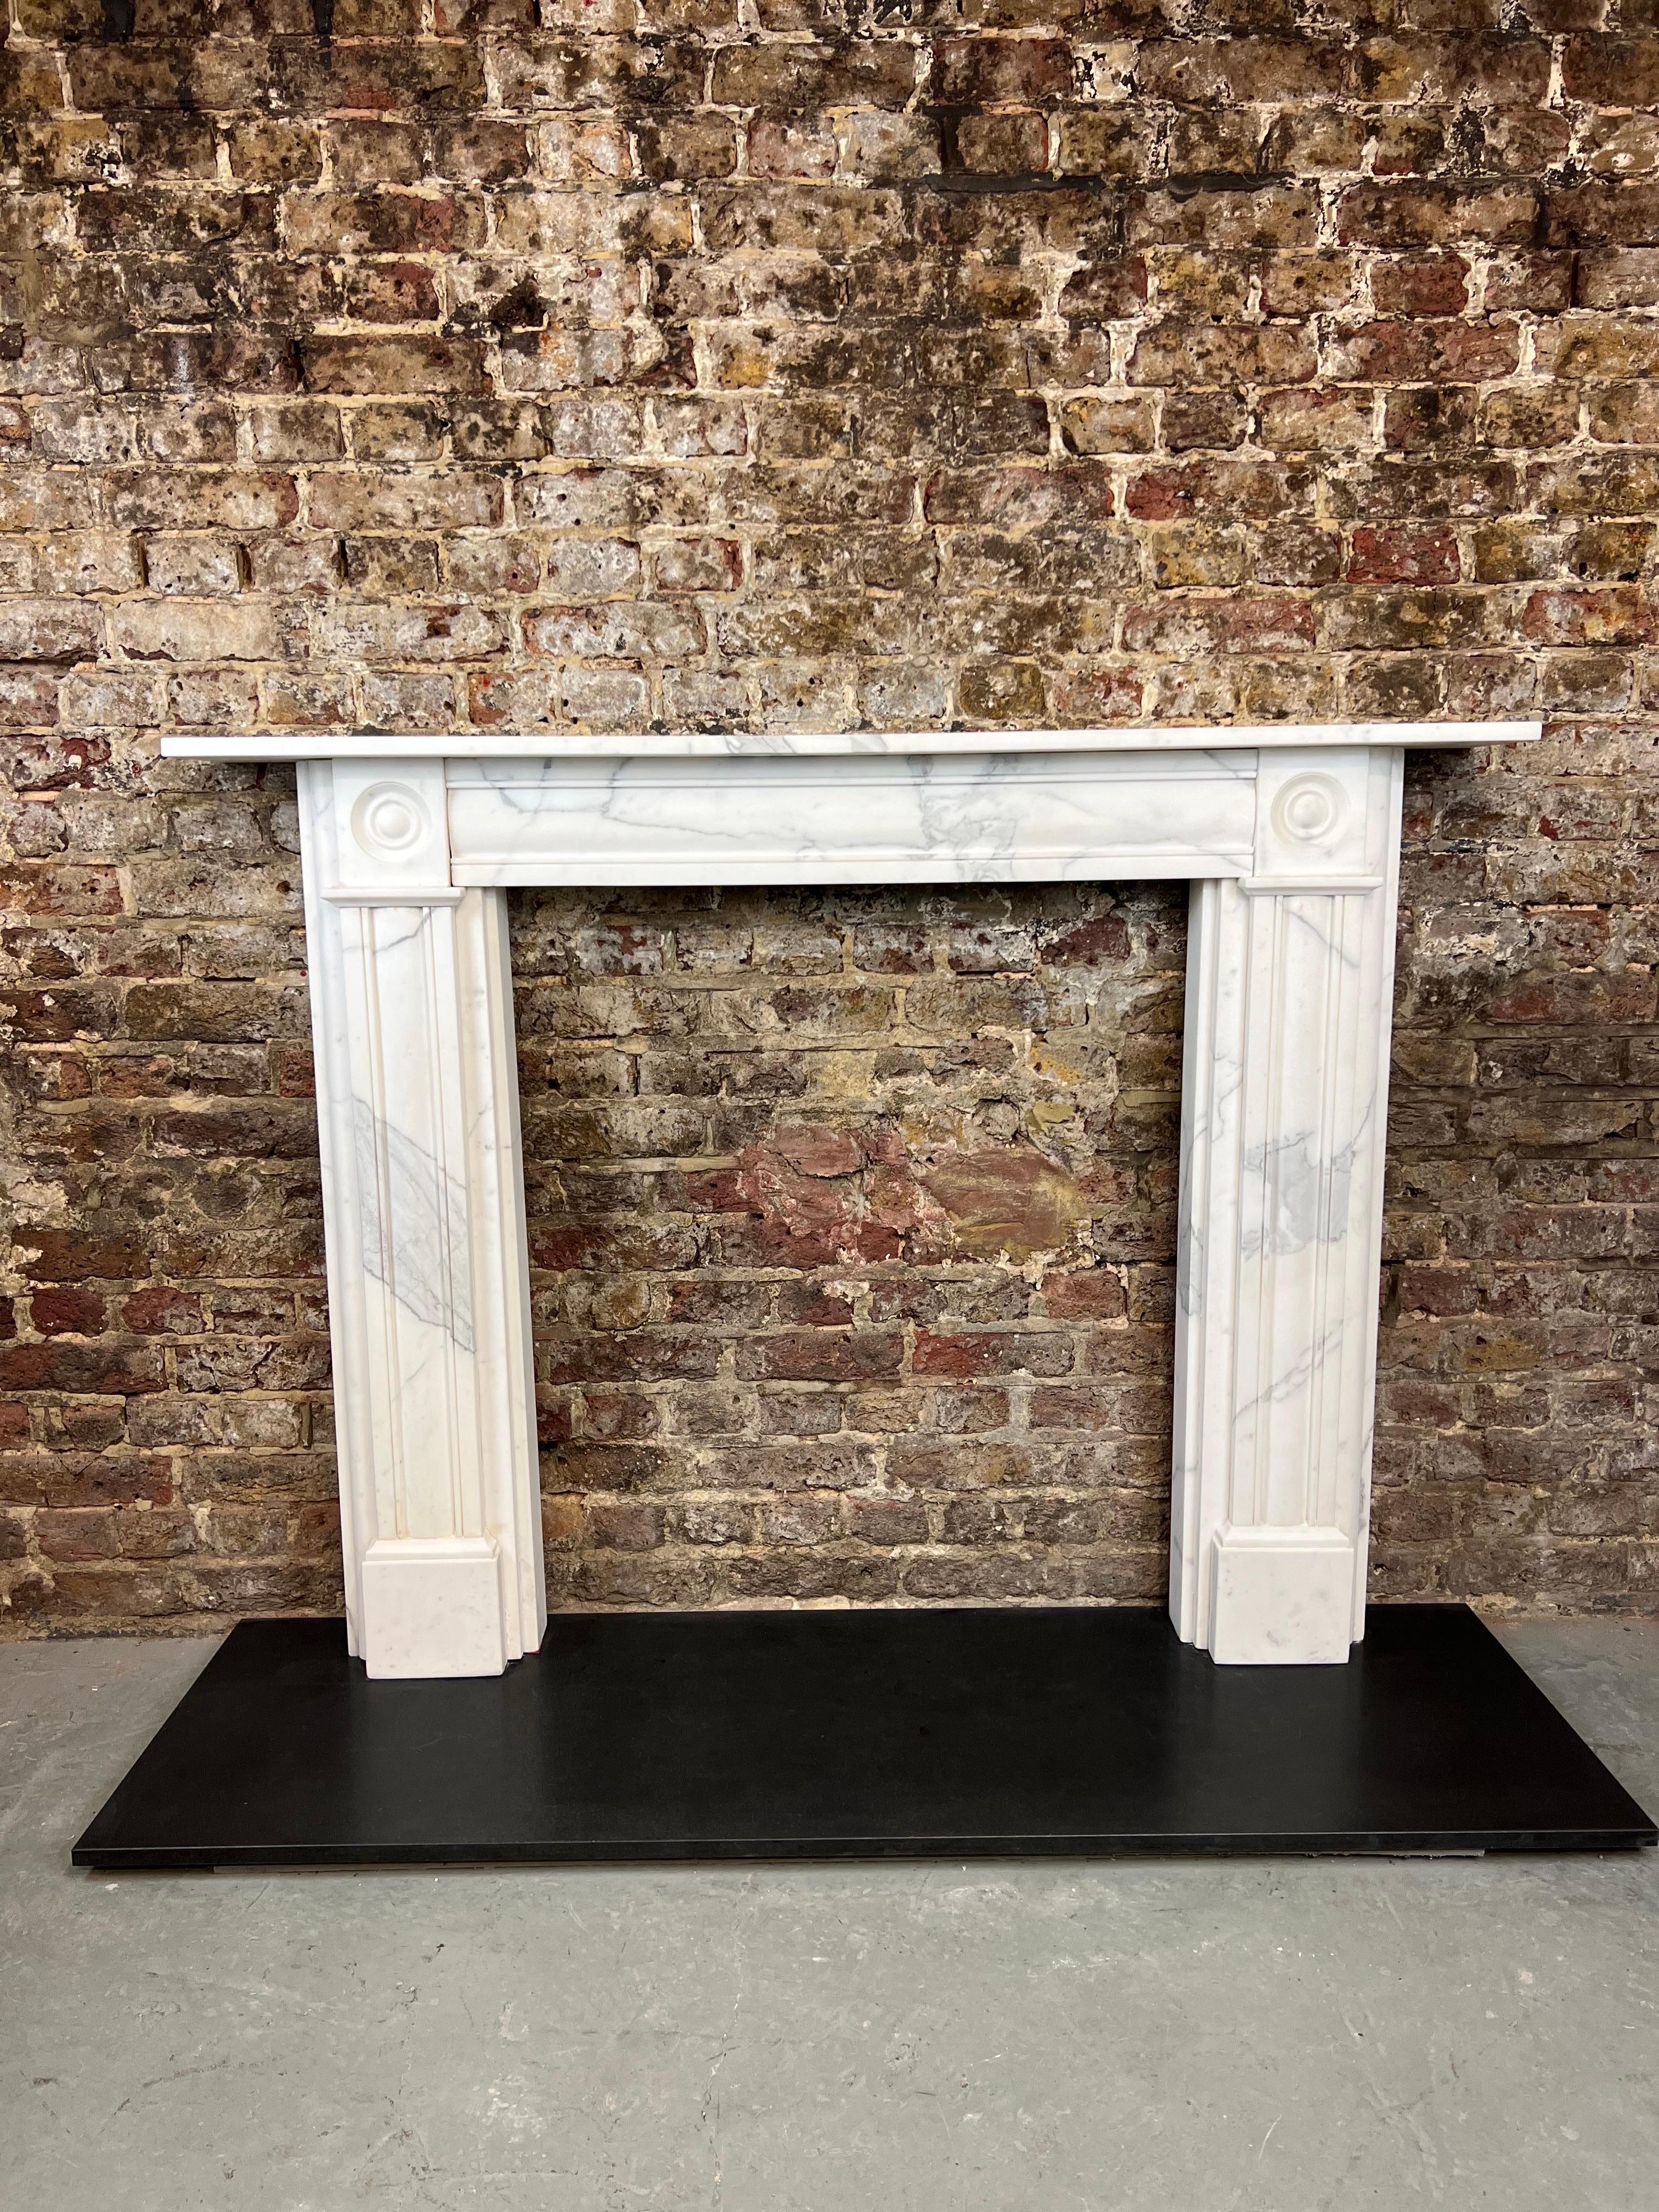 19th Century Carrara Marble Fireplace Mantlepiece.
Bullseye Style Fireplace Surround With Demi Recessed Panels Within The Jabs & Centre Frieze. English Made From Italian Light Carrara Marble.
Dated Circa 1860-1880. Recently Salvaged From A London